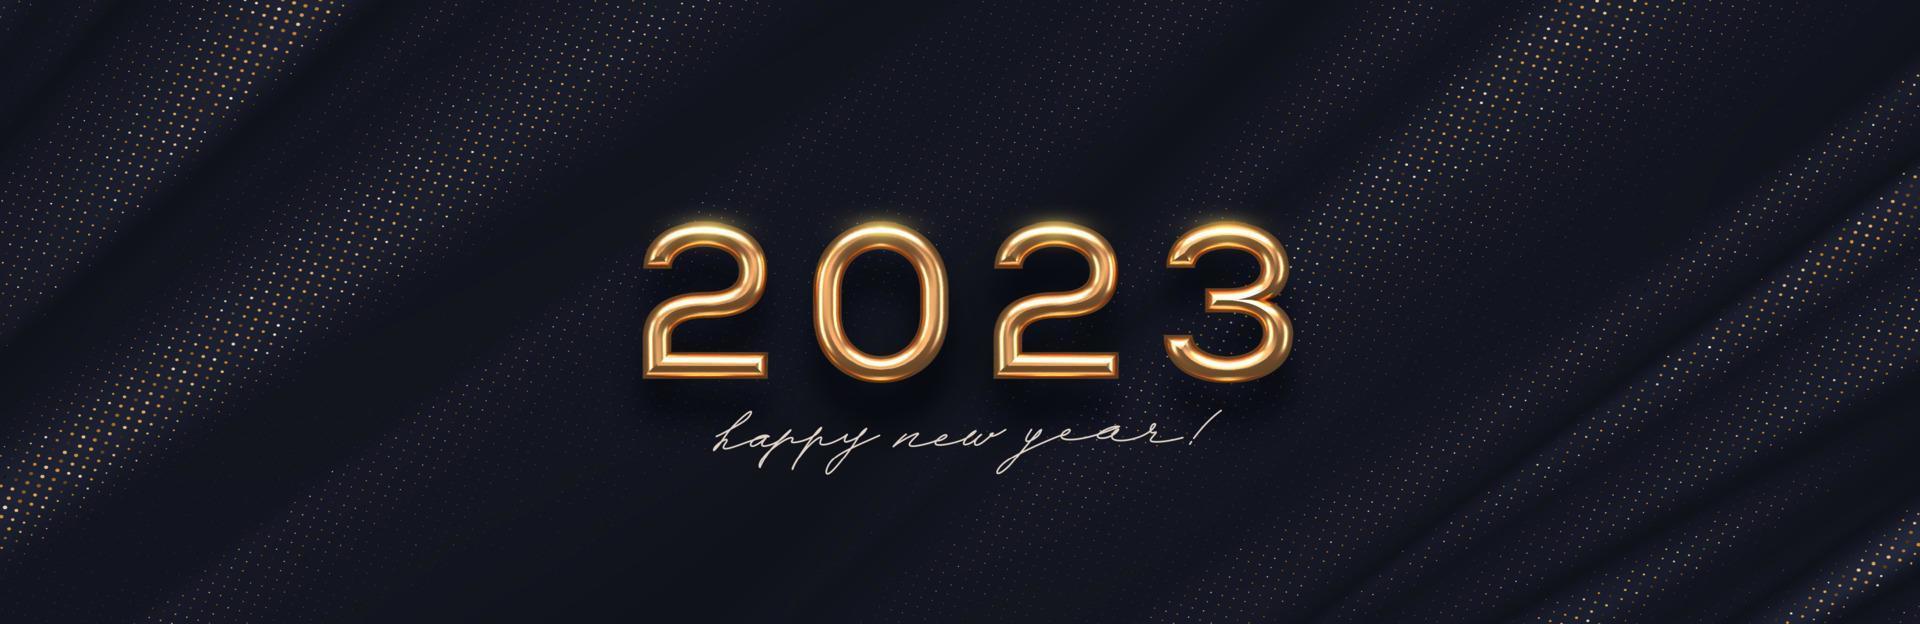 2023 new year golden logo on abstract black textile background. Greeting design with realistic gold metal number of year. Design for greeting card, invitation, calendar, etc. vector